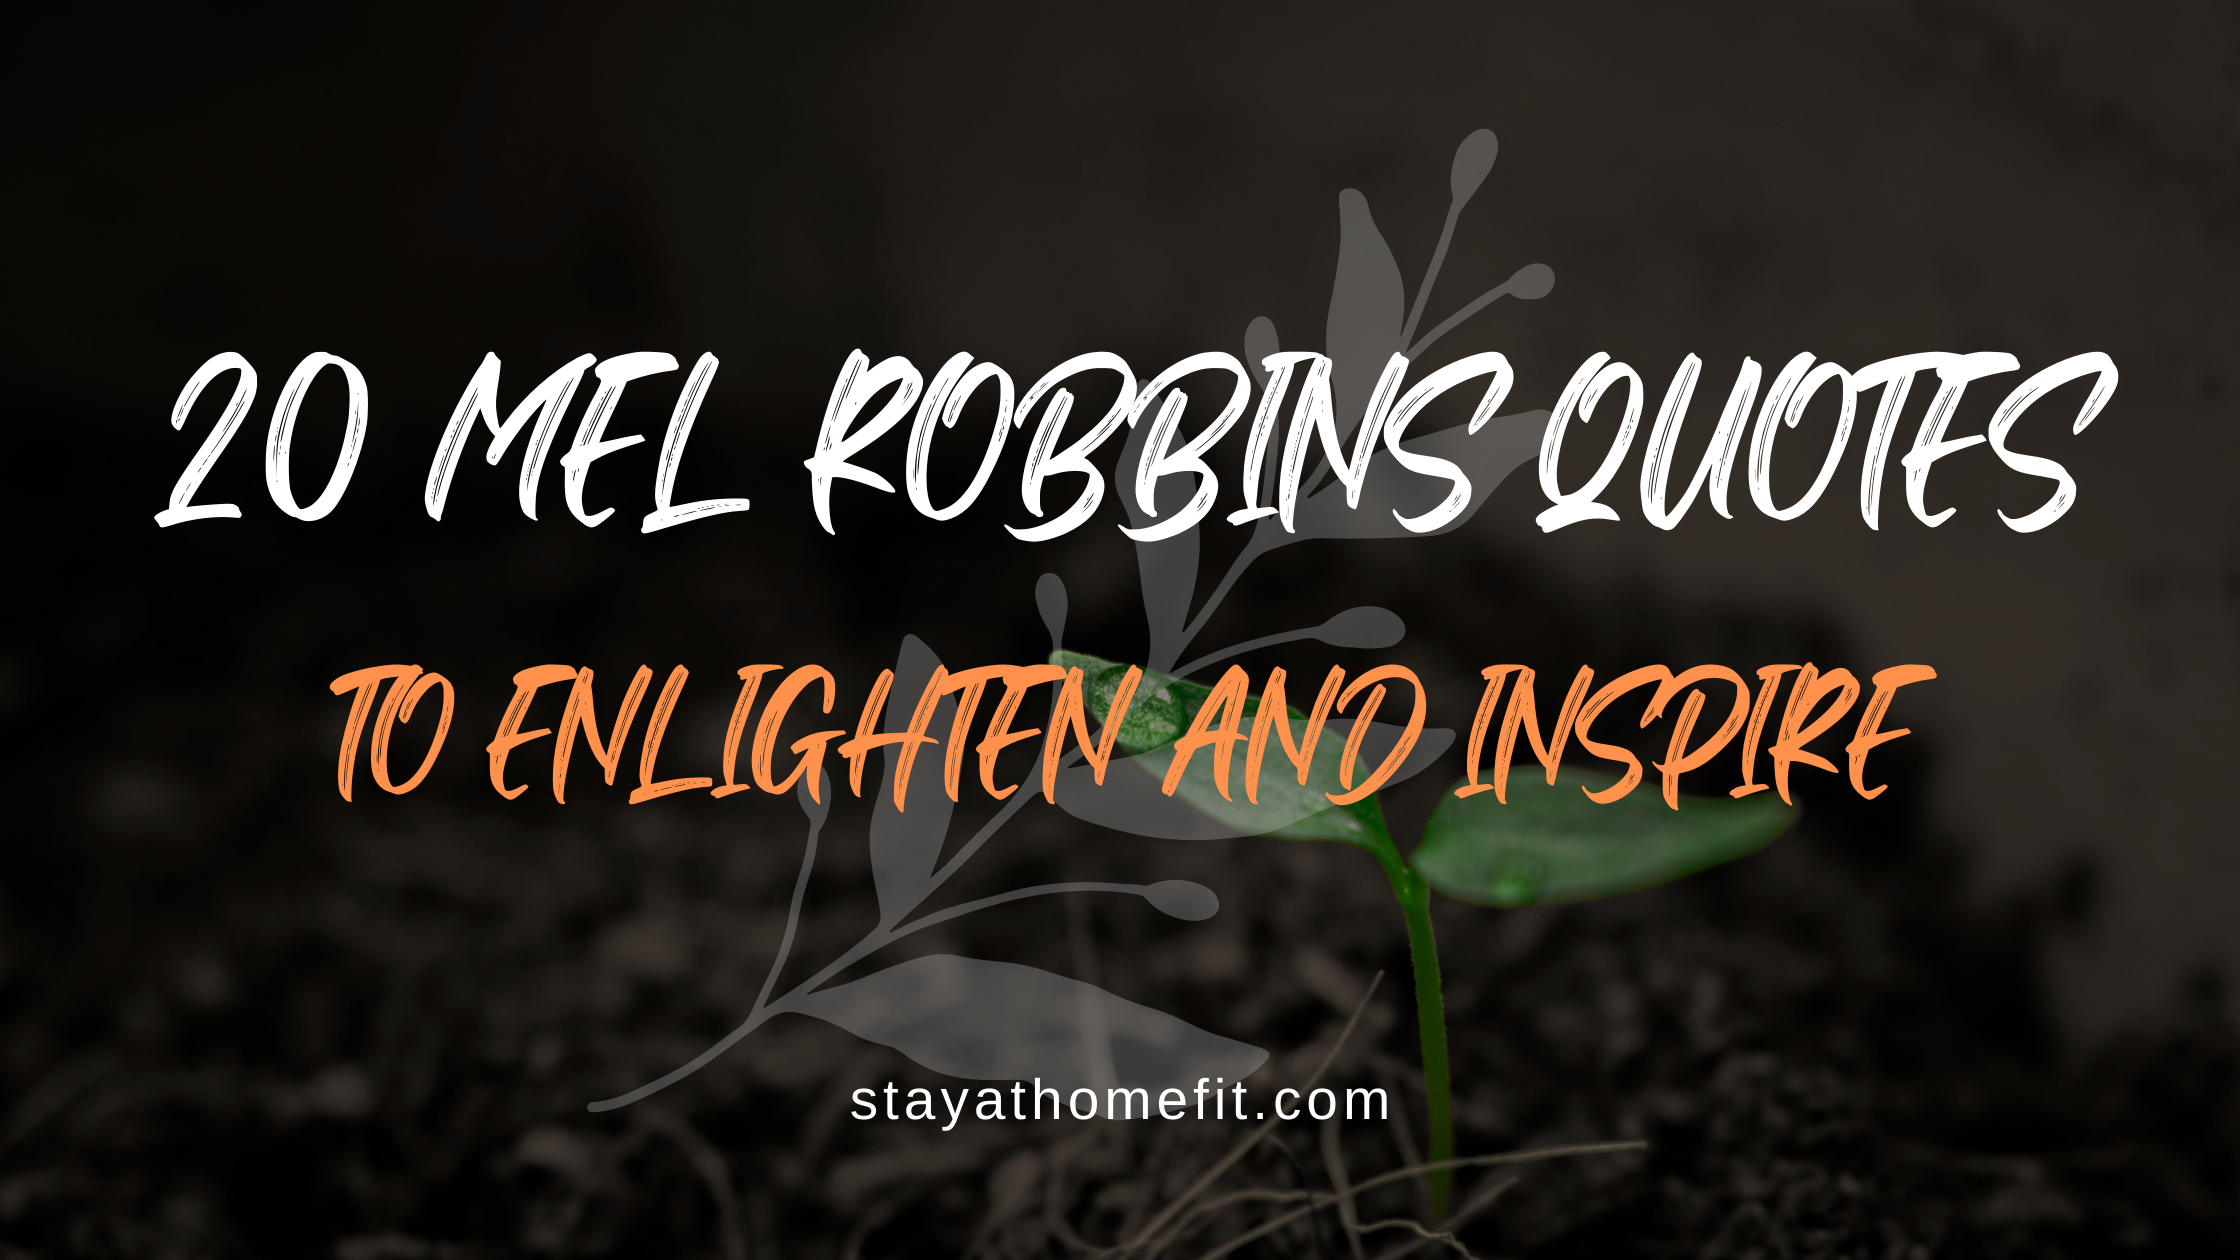 Blog Title: 20 Mel Robbins Quotes to Enlighten and Inspire